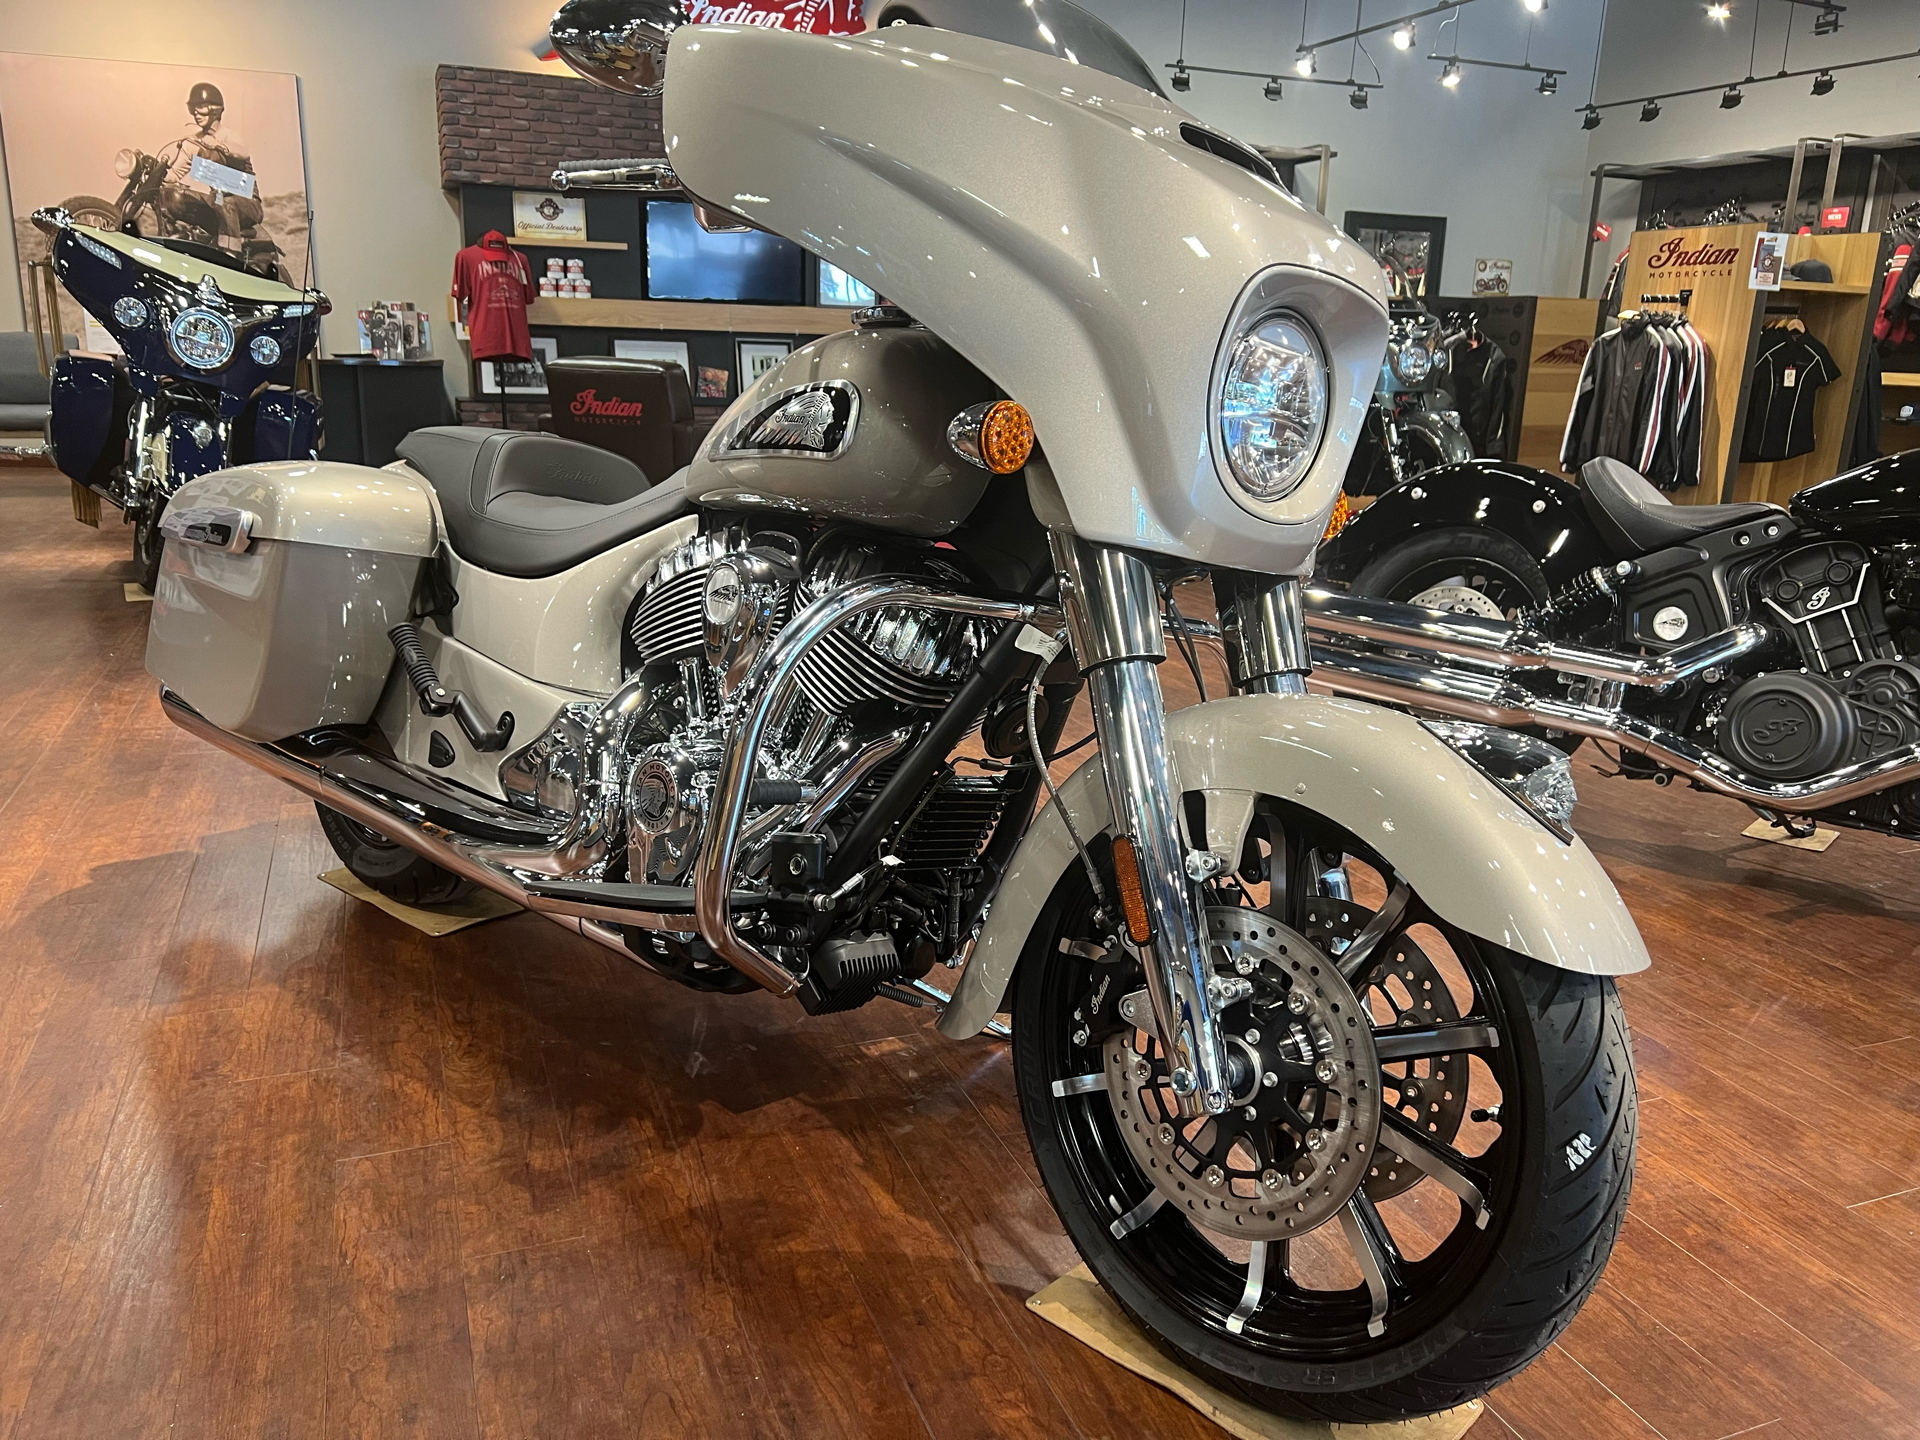 2022 Indian Chieftain® Limited in Chesapeake, Virginia - Photo 2